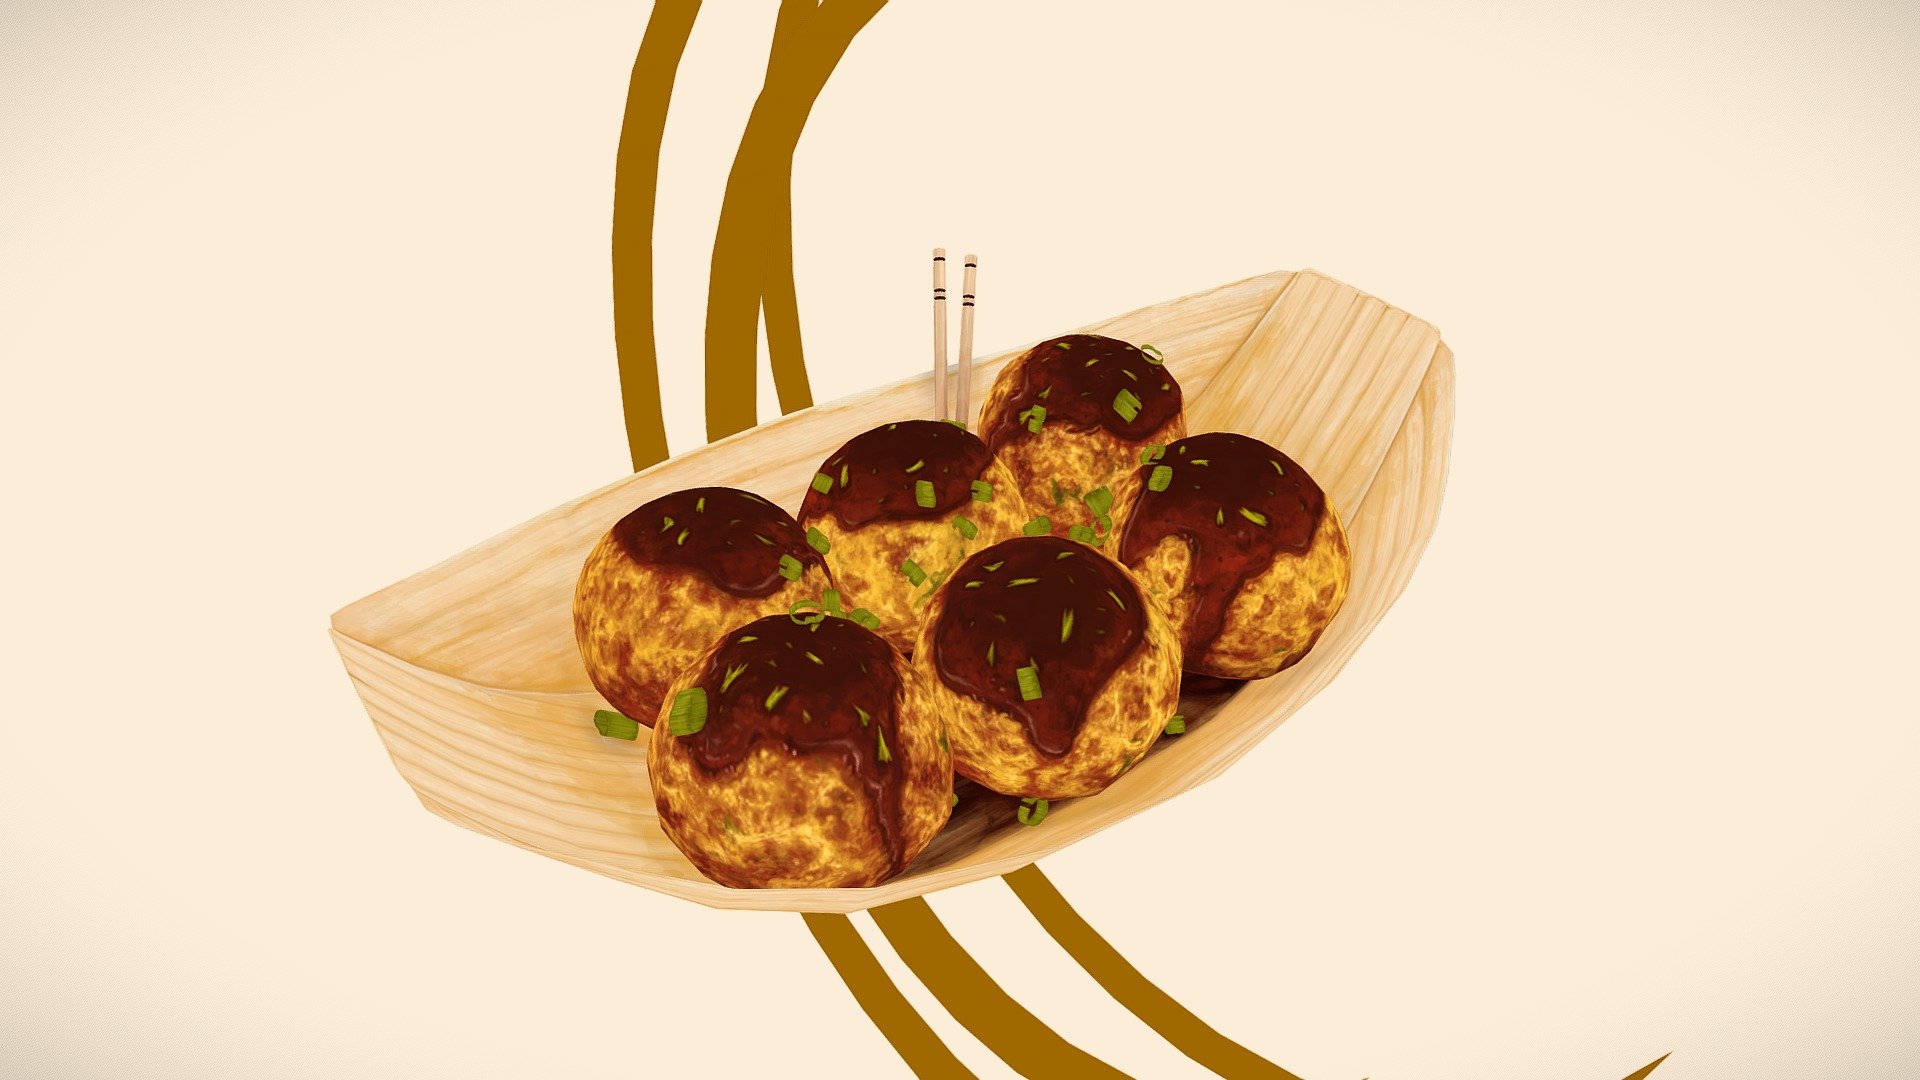 Model, textures and the love I put in it were made in Blender, hope you like it!

This is my entry for @curlscurly &lsquo;s #FoodChallenge ! - Takoyaki - 3D model by Lou (@DelCastillo_h6) 3d model